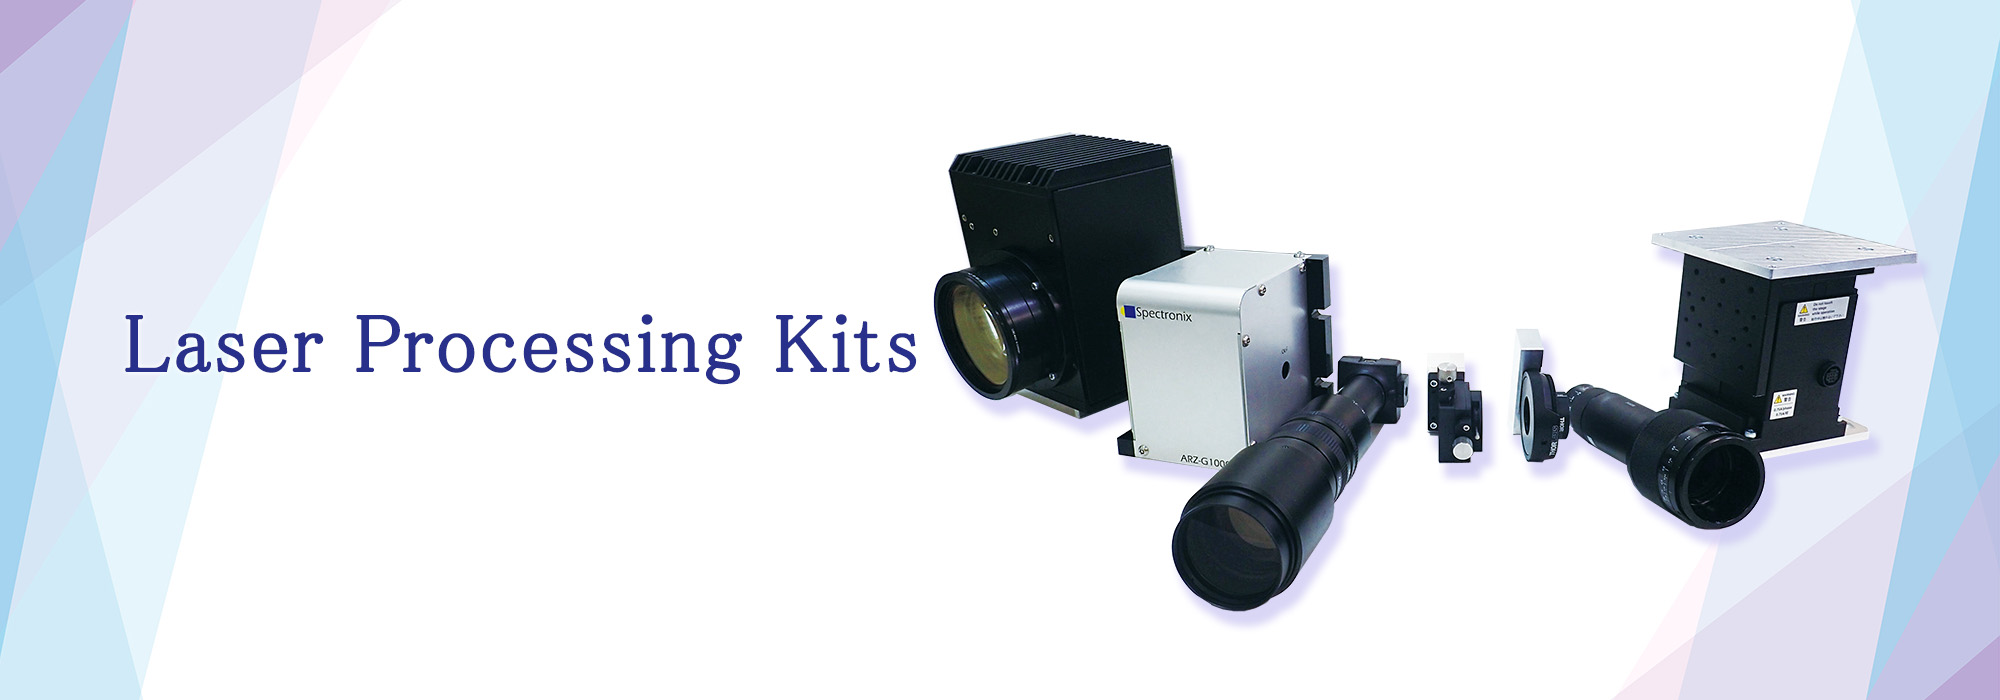 Our Laser Processing Kits